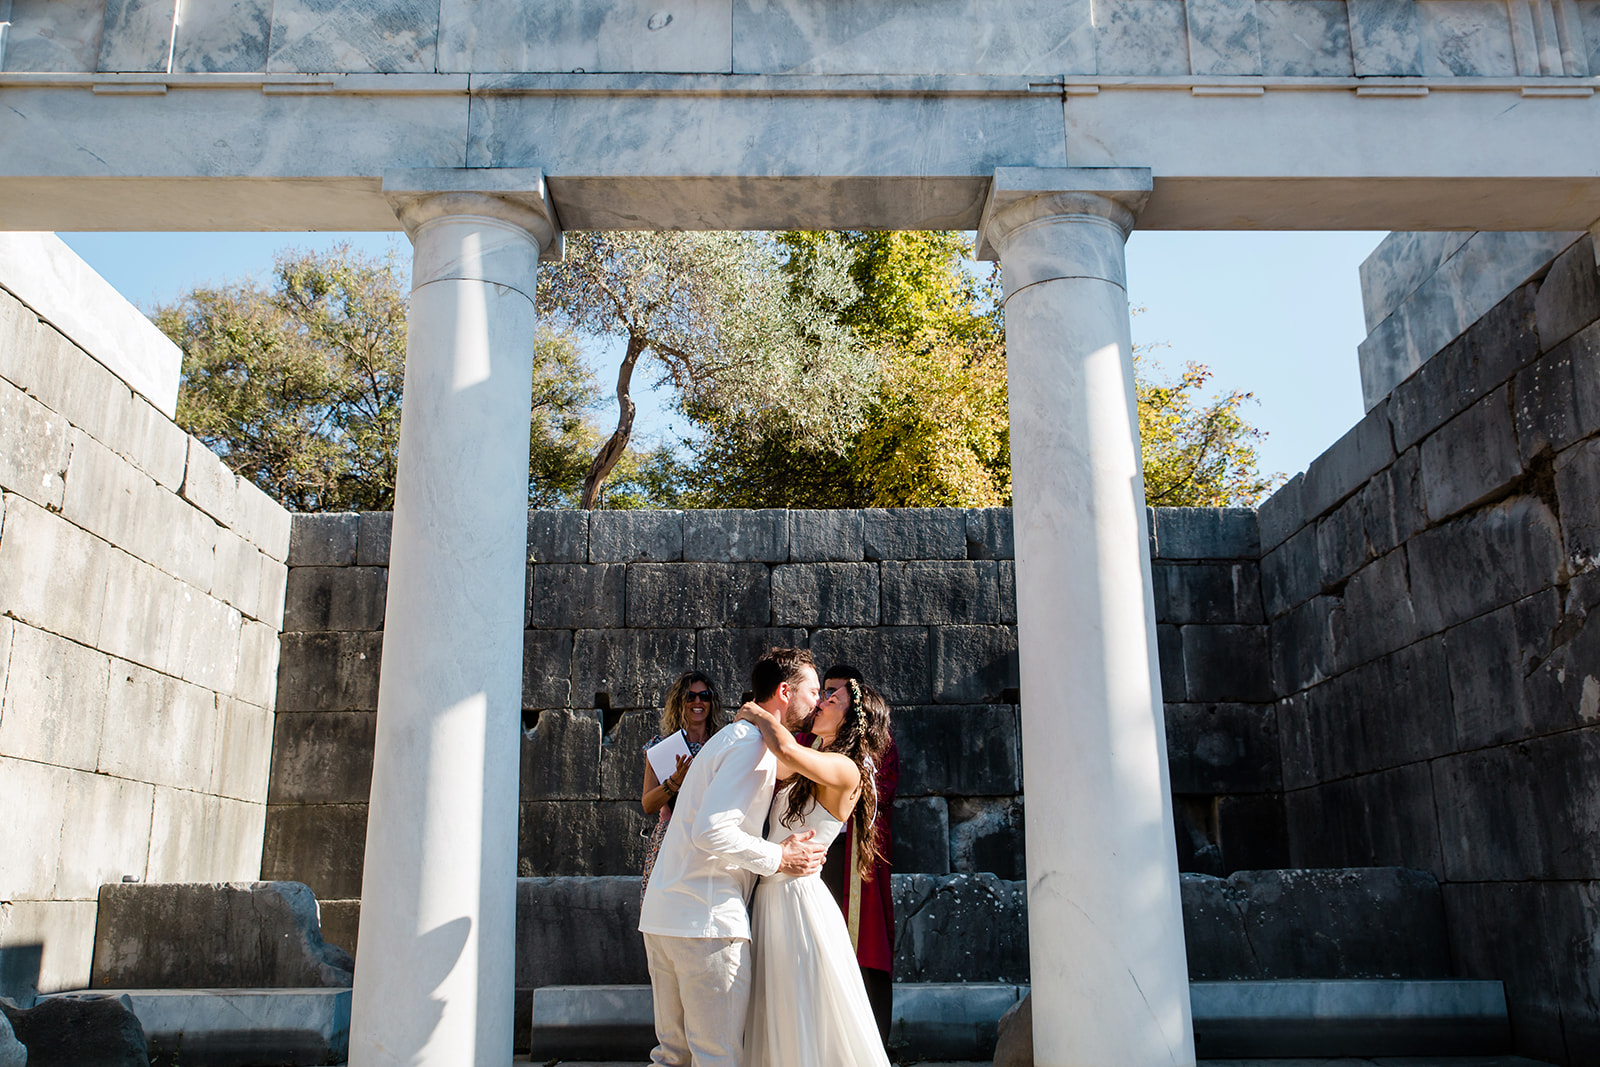 Bride and groom kissing after the ceremony in Dalyan, Kaunos ruins